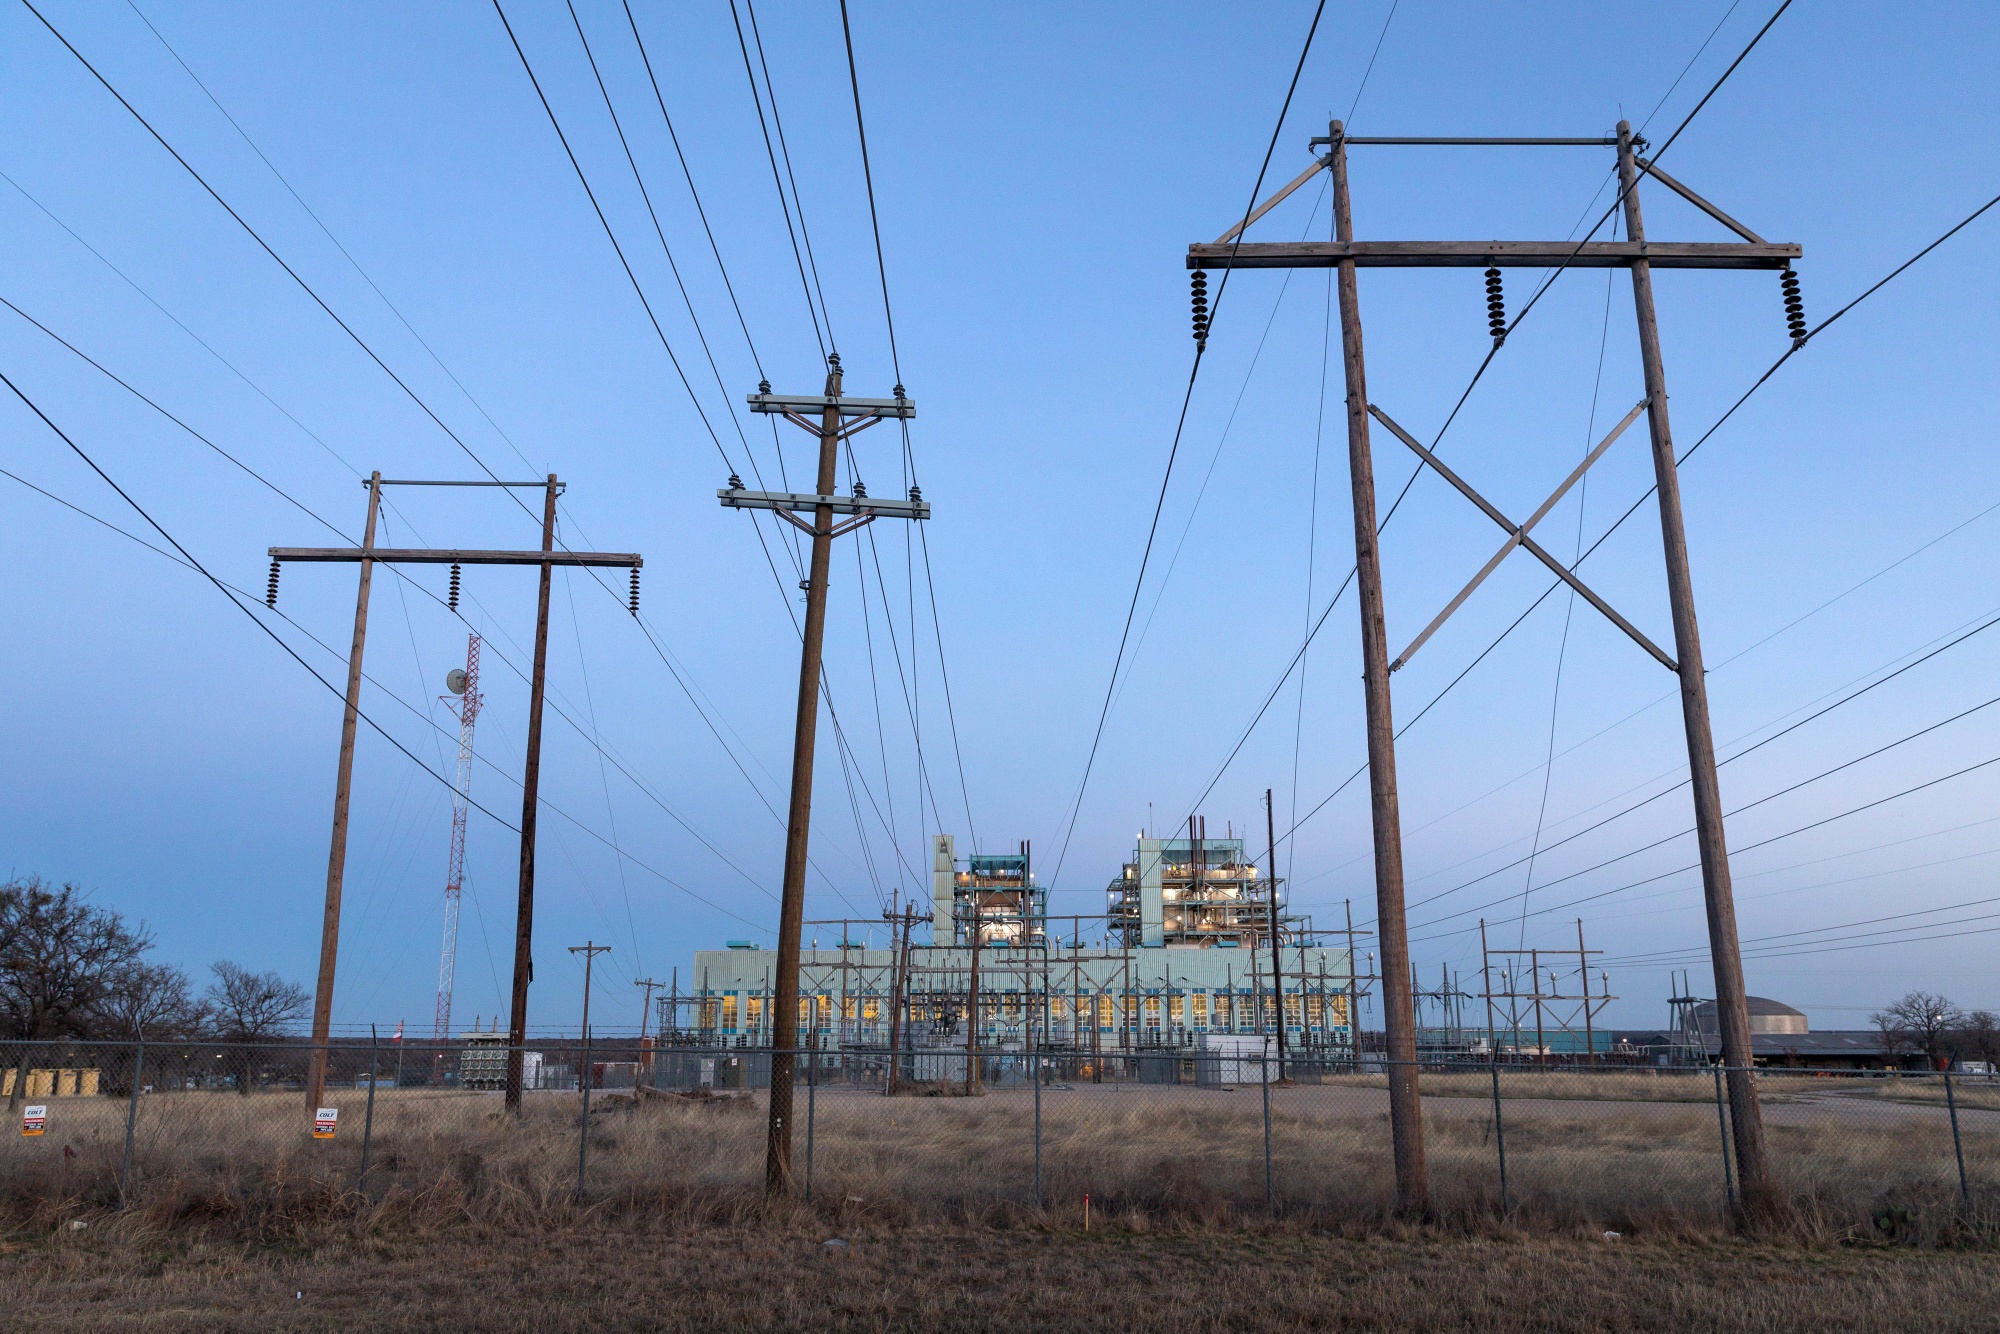 A power plant in Palo Pinto, Texas.